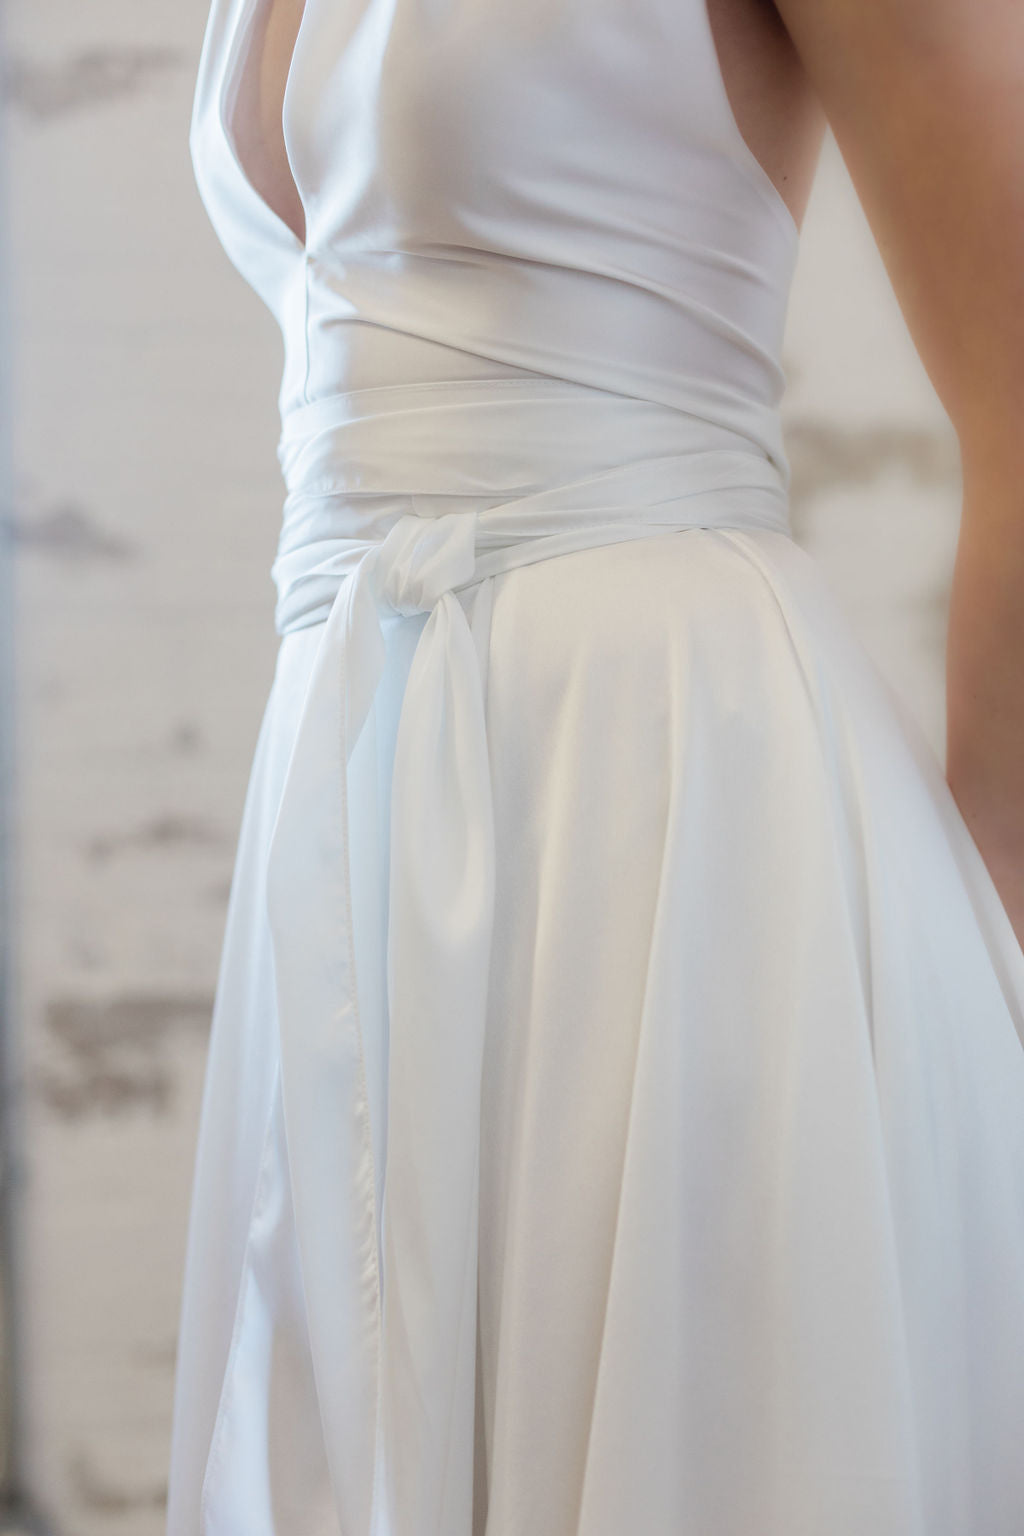 Romantic satin bridal skirt. Modern bridal separates. Made in Toronto, Canada by Catherine Langlois.